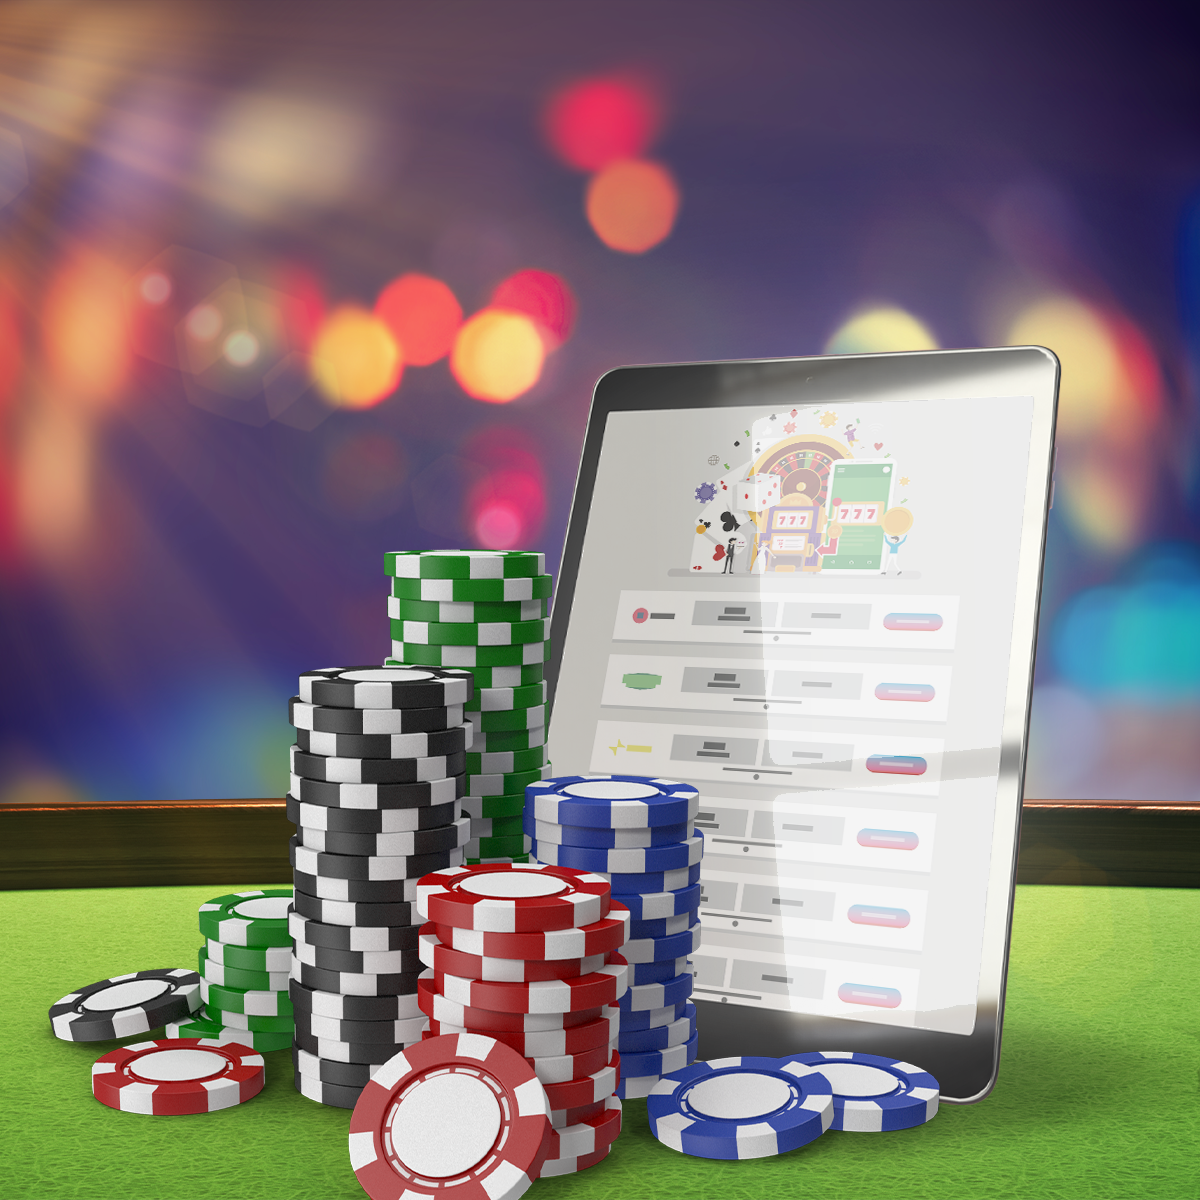 Mobile phone casinos you can deposit by phone billing center